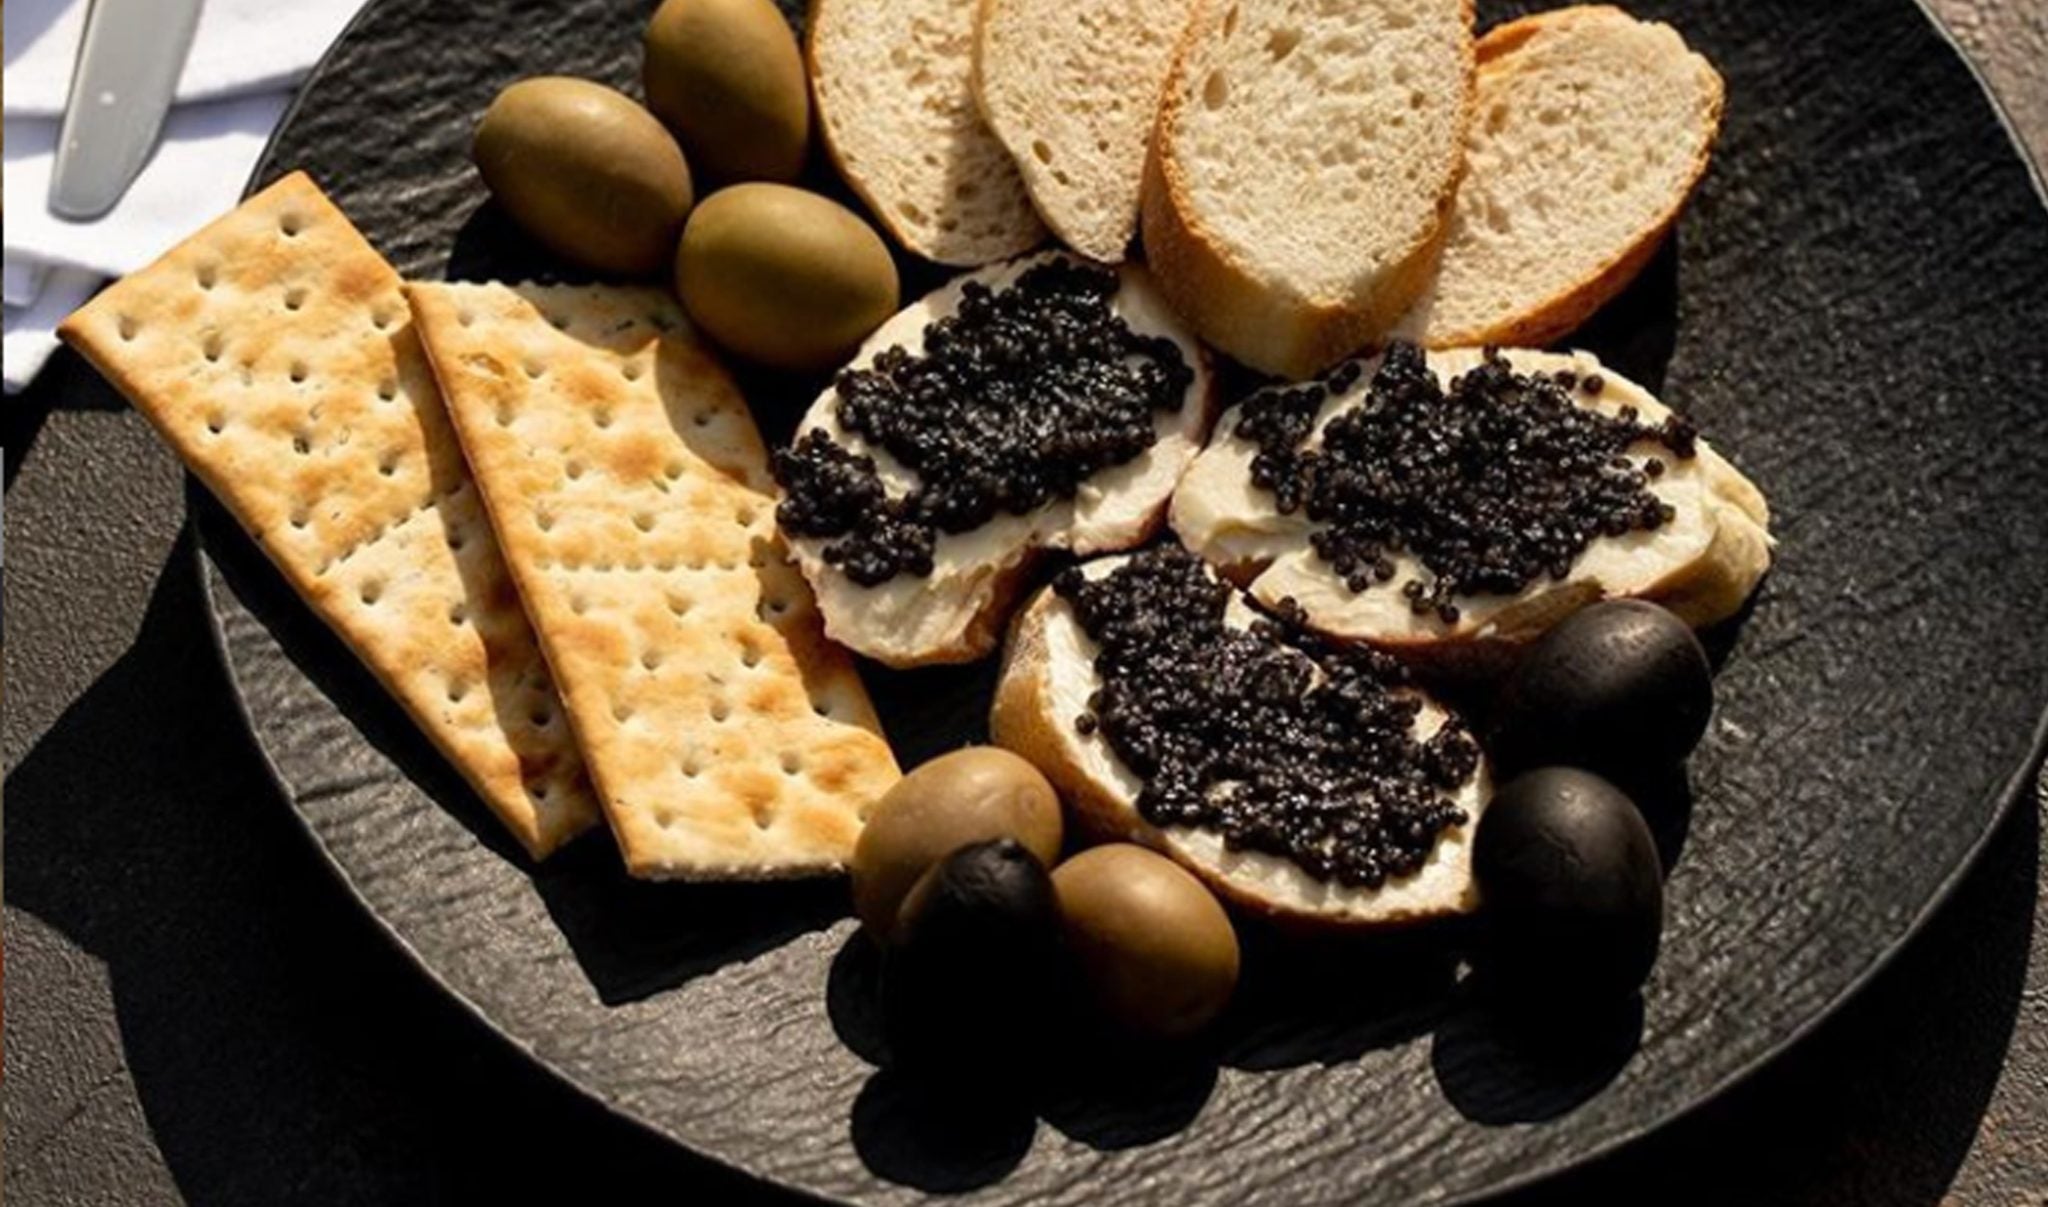 How to Serve Caviar: The Indispensable Guide